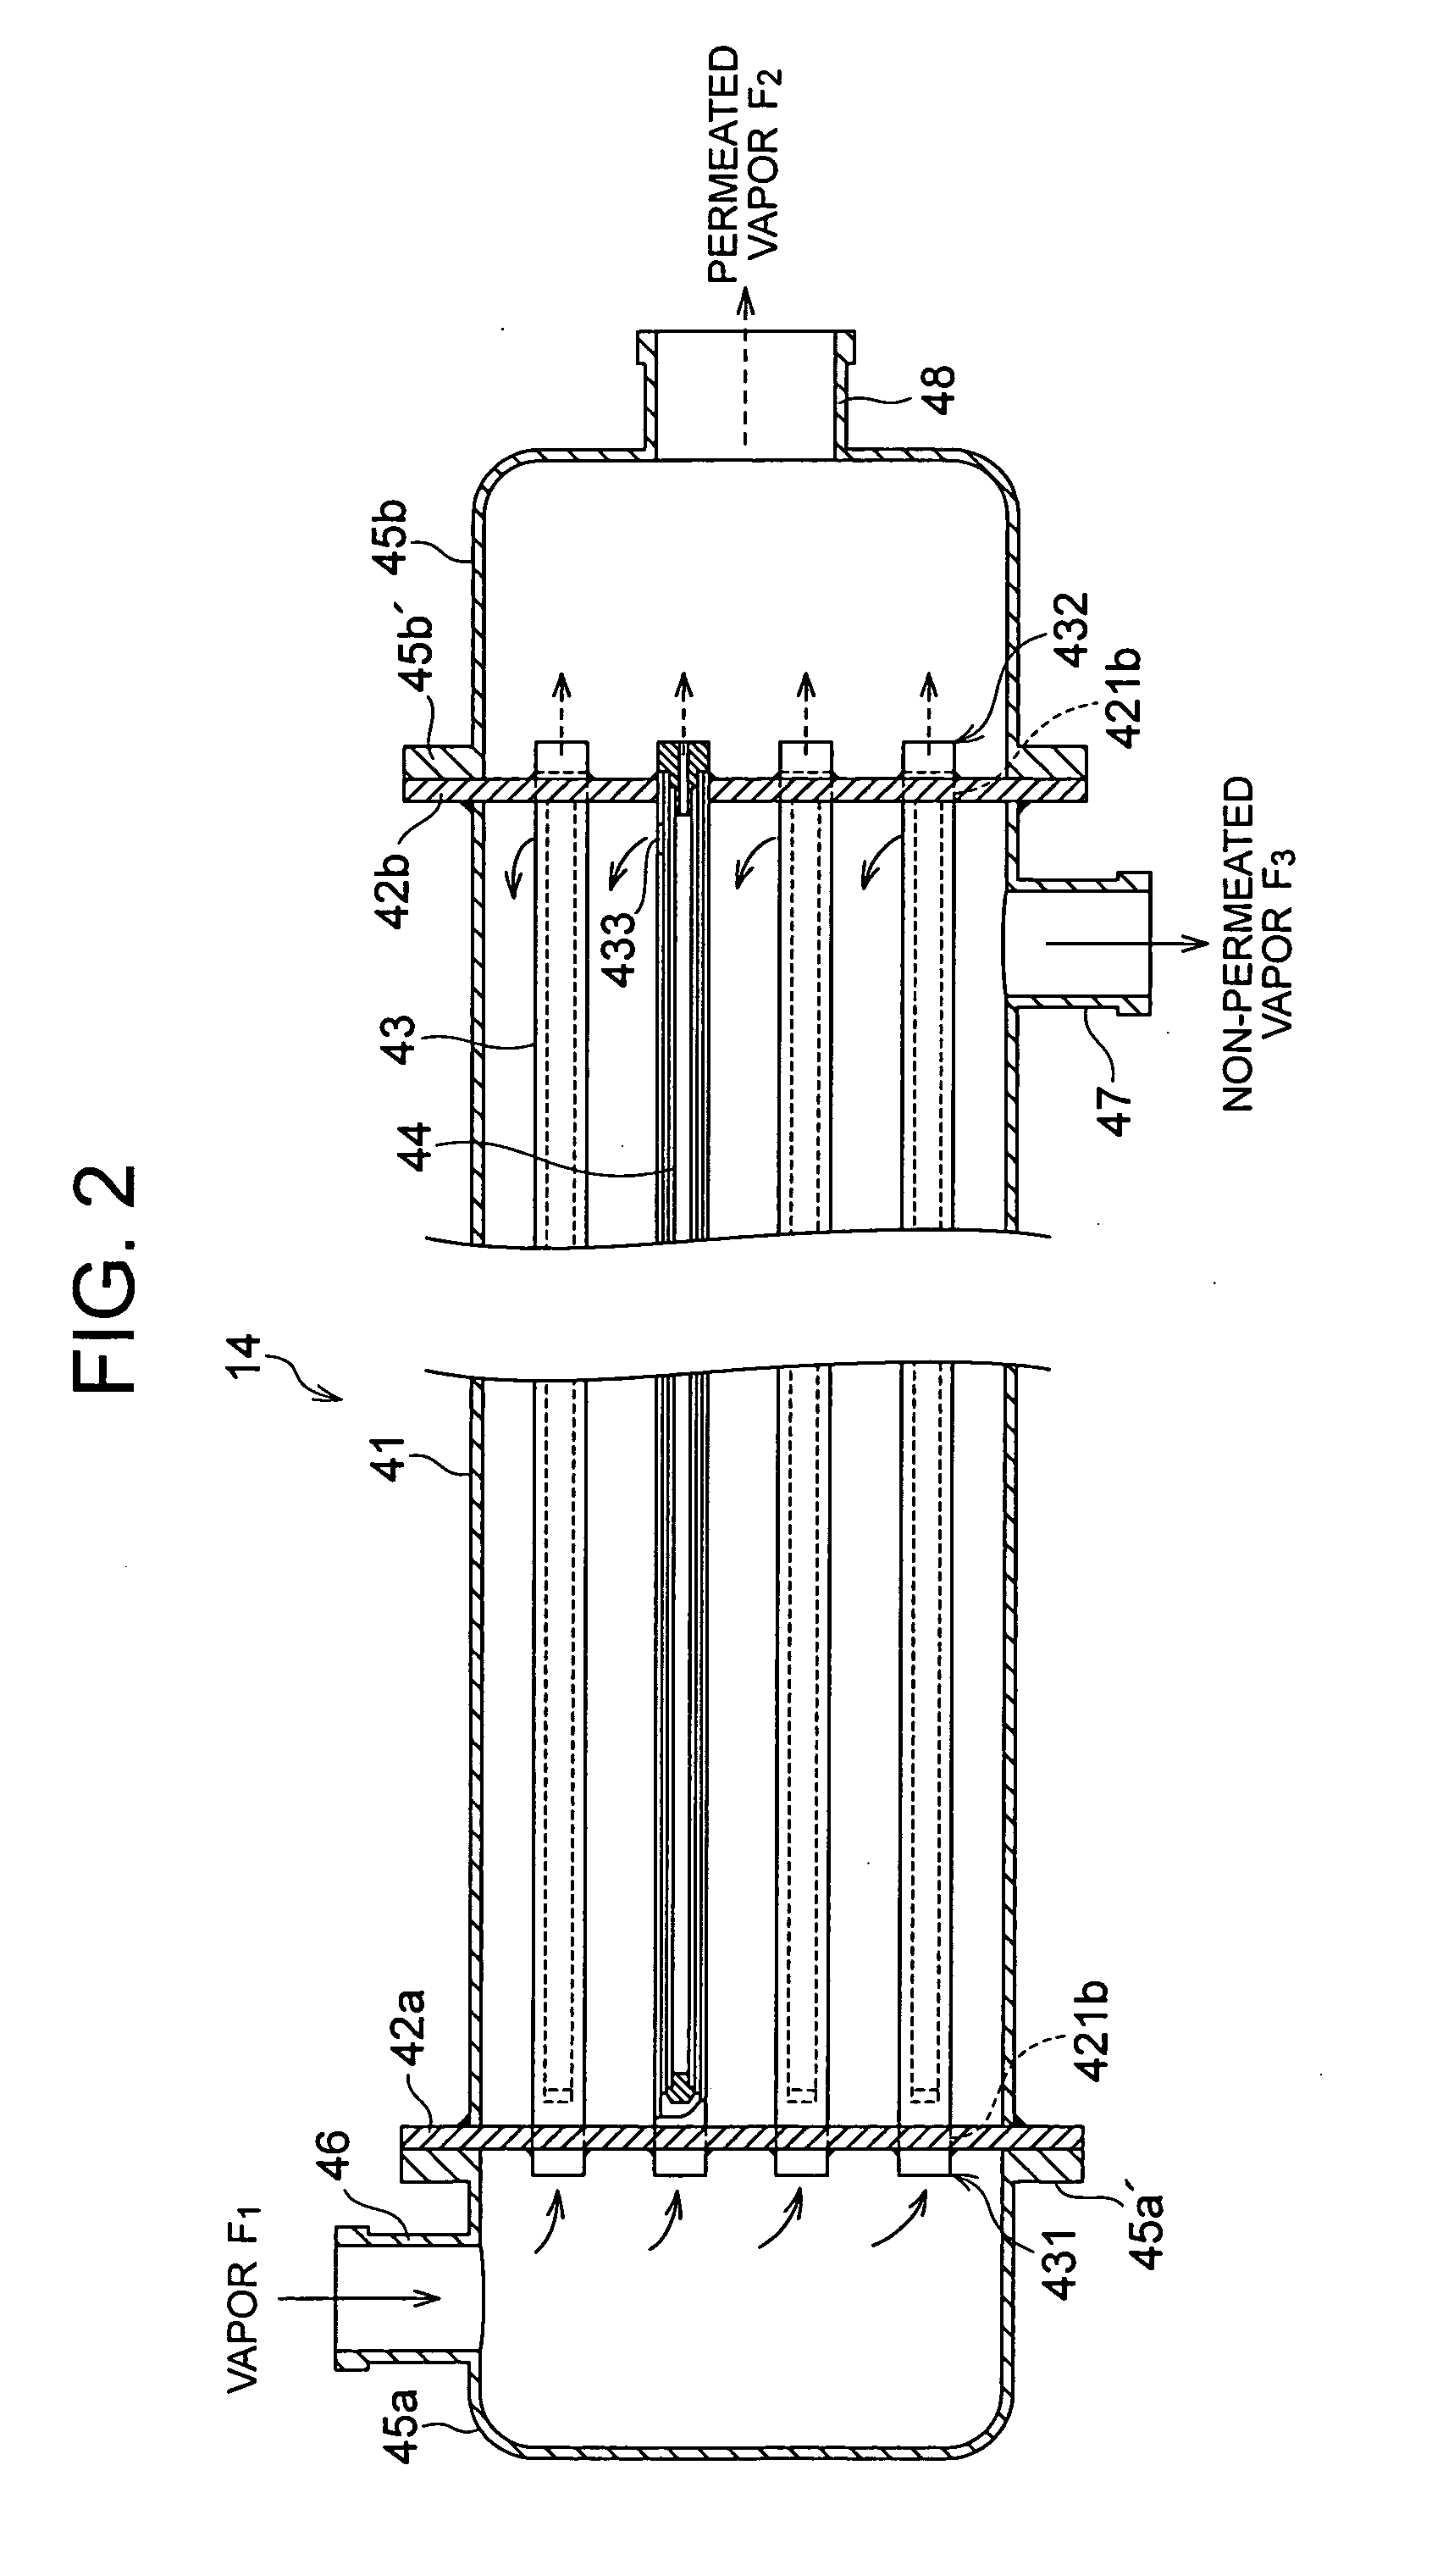 Method for concentrating water-soluble organic material